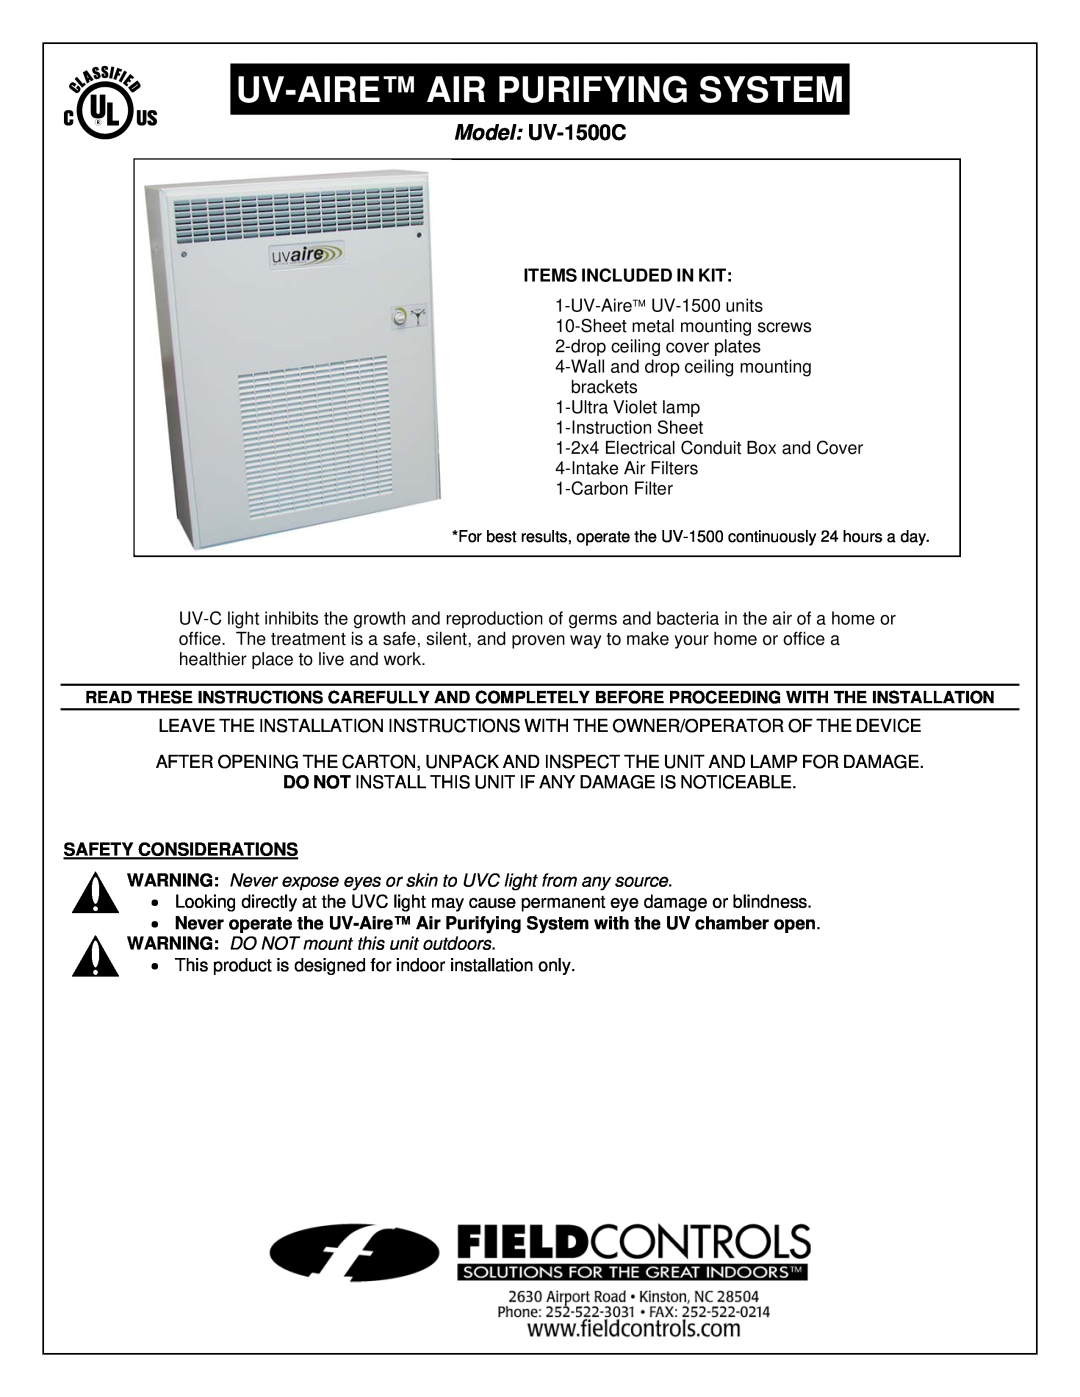 Field Controls installation instructions Items Included In Kit, Safety Considerations, Model UV-1500C 